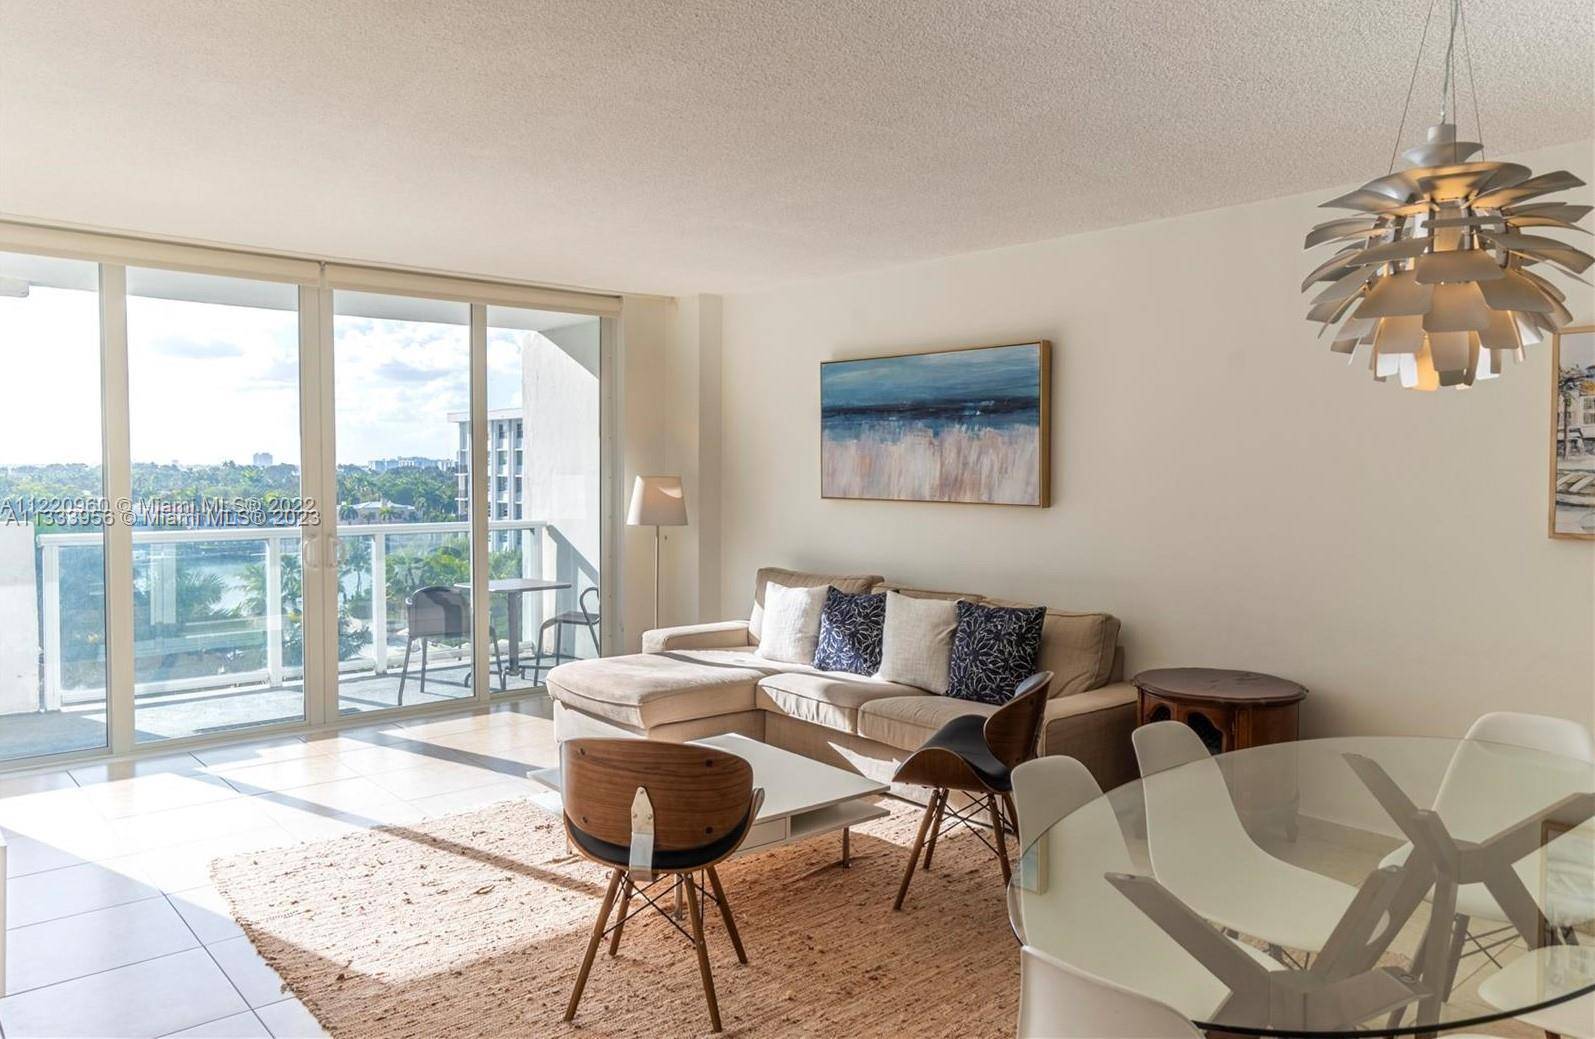 Beautifully renovated 2 bedroom 1 Den with 1 and 1 2 bathroom, with open Intracoastal view.